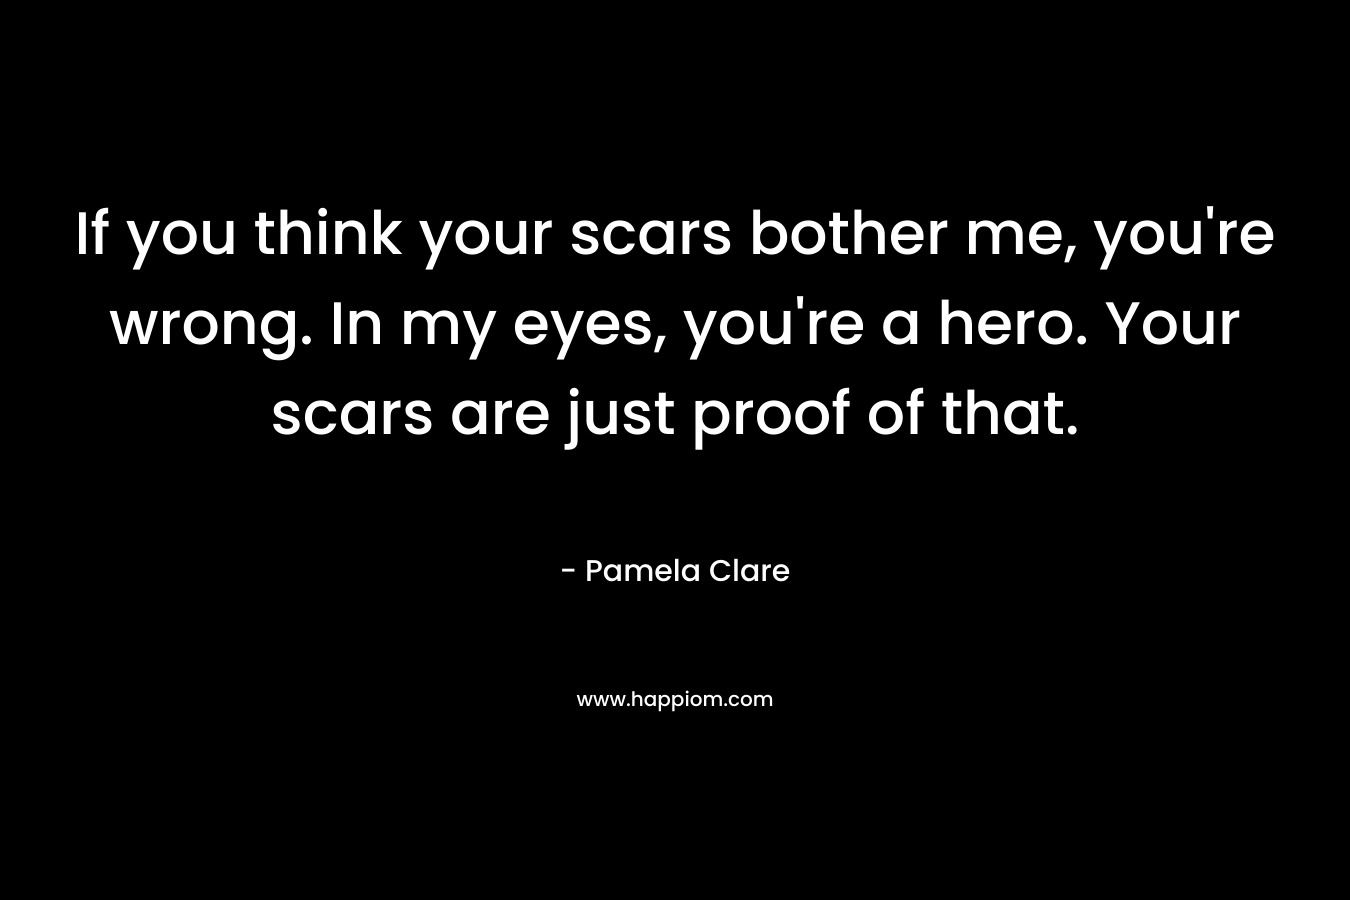 If you think your scars bother me, you’re wrong. In my eyes, you’re a hero. Your scars are just proof of that. – Pamela Clare